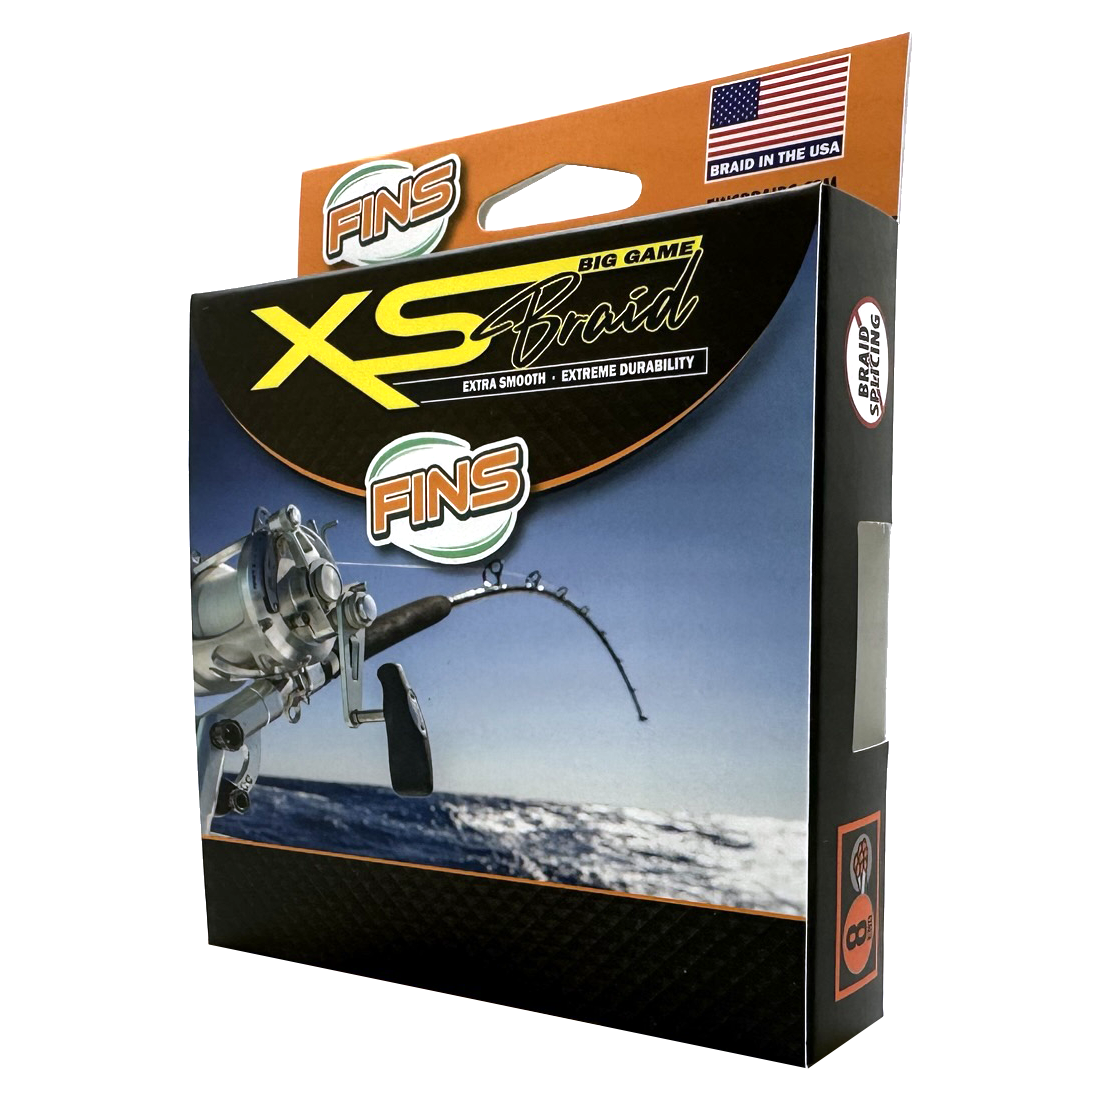 FINS XS Braided Fishing Line Extra Smooth by Braidman 